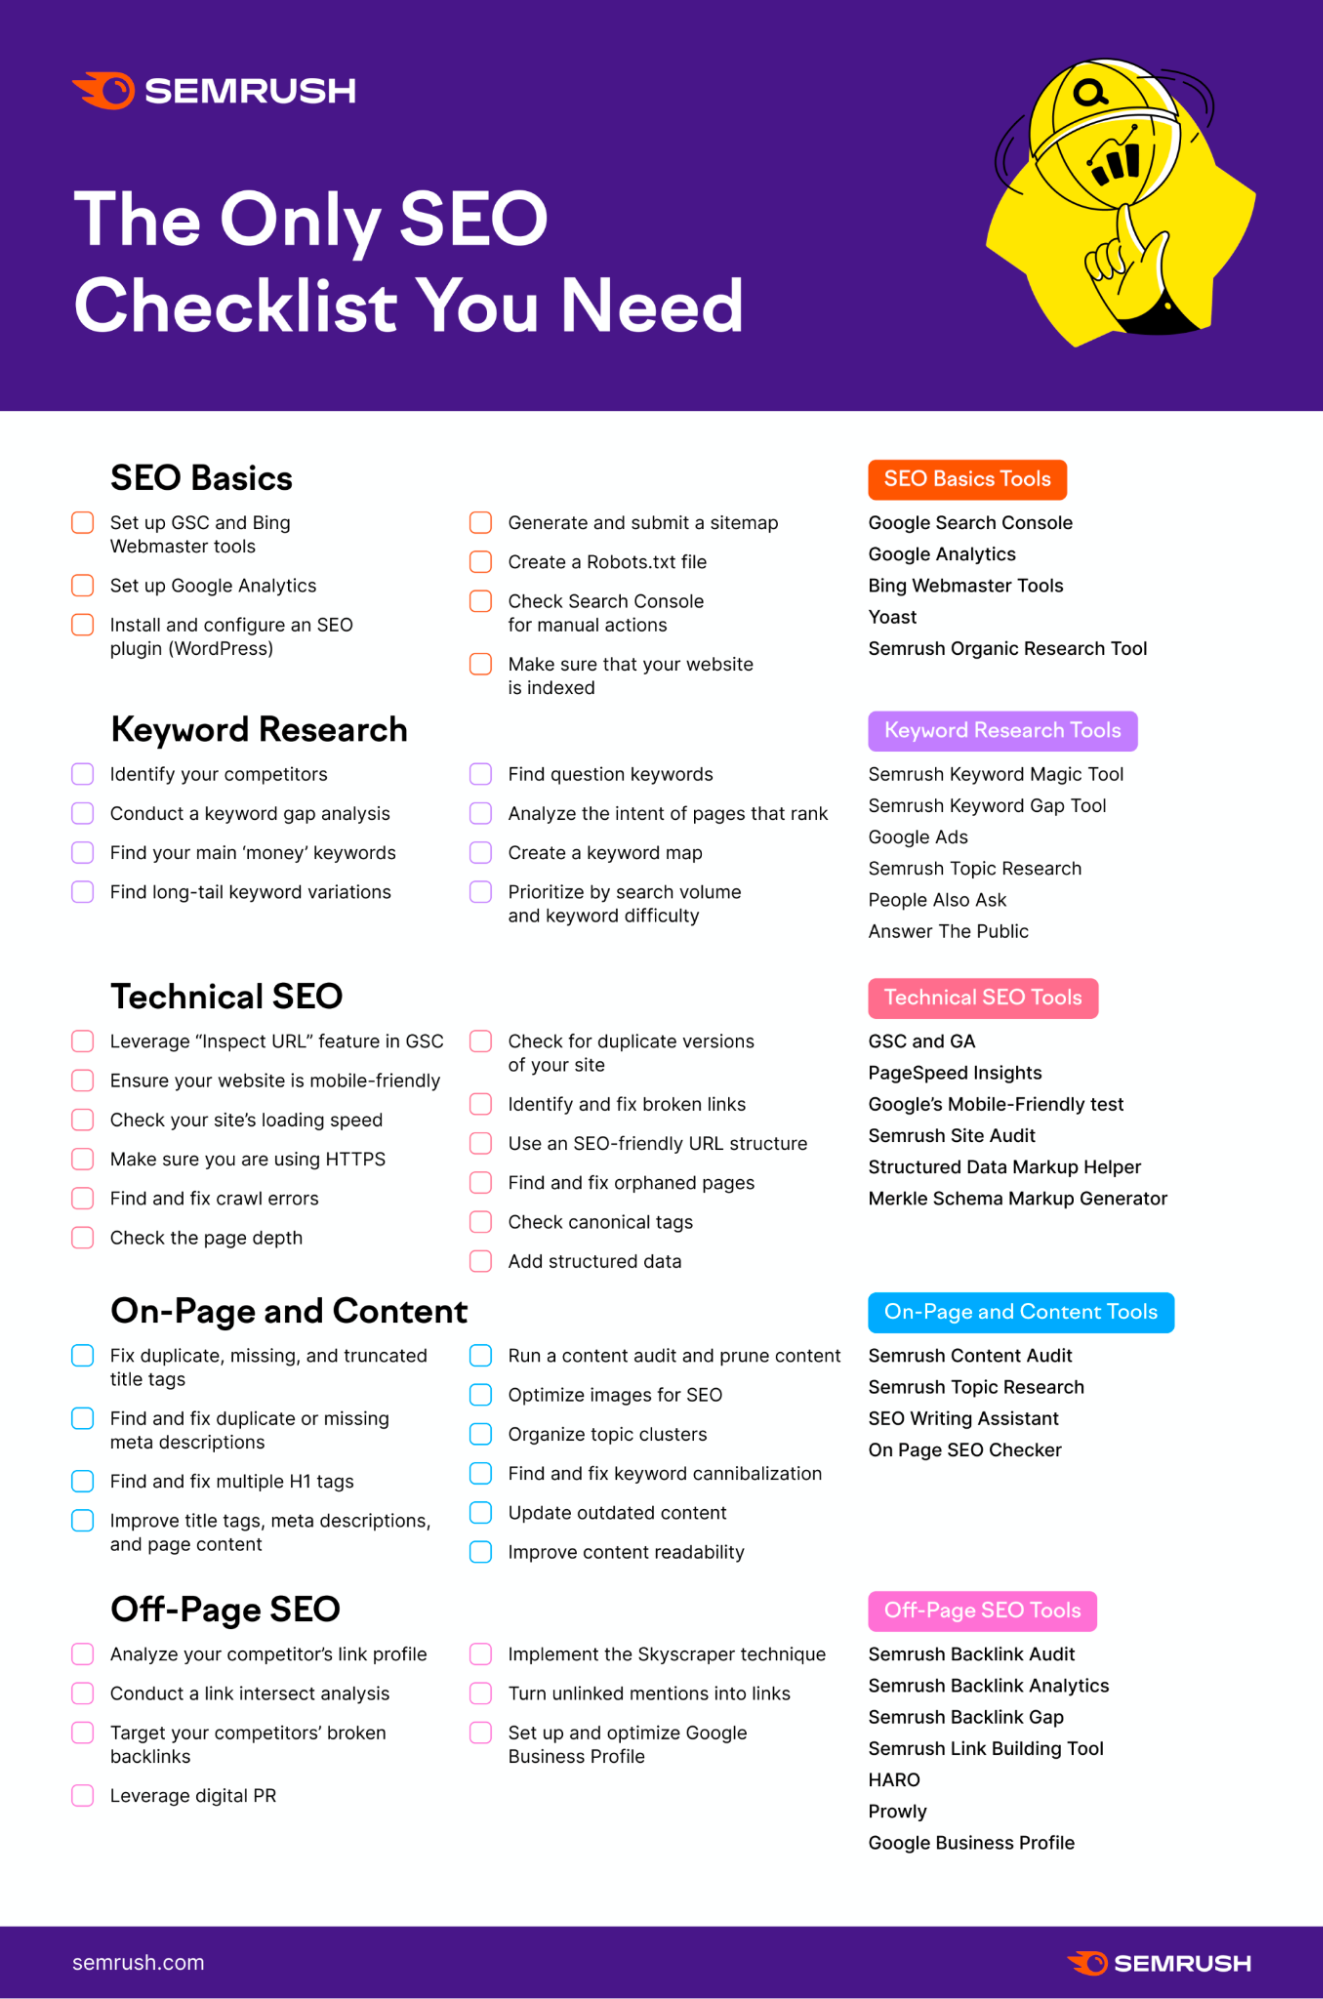 The Ultimate Off-Page SEO Checklist